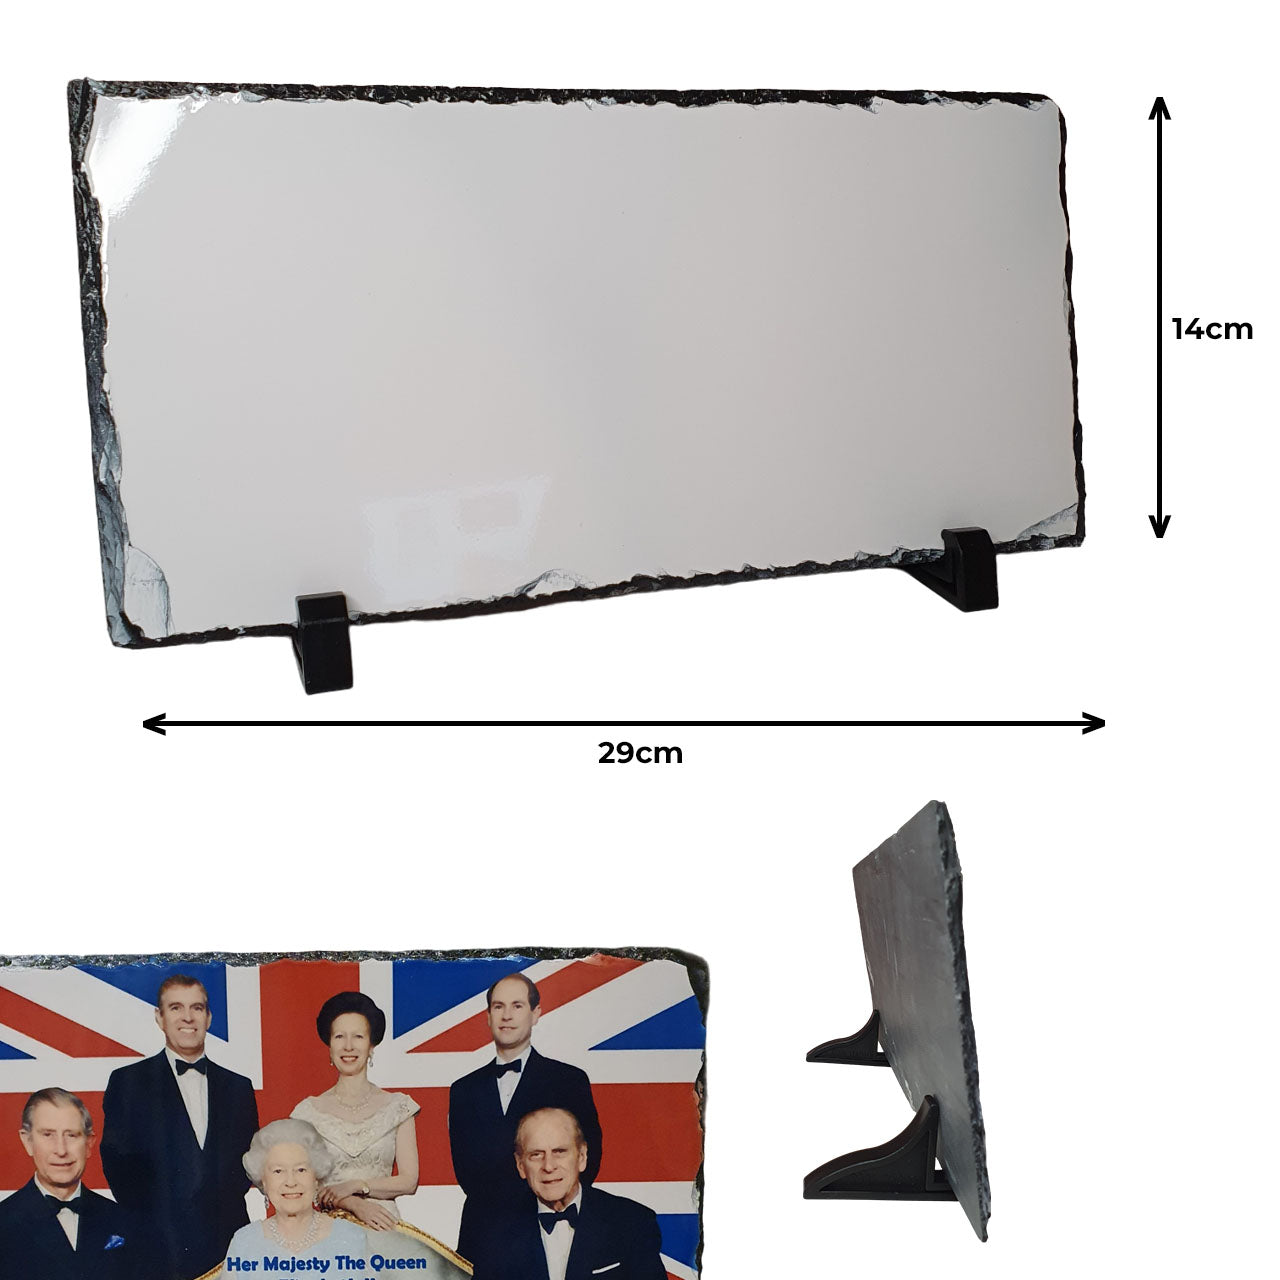 home decor photo slate blank 20 x 14cm on black plastic stands, also shows back of item and print quality example